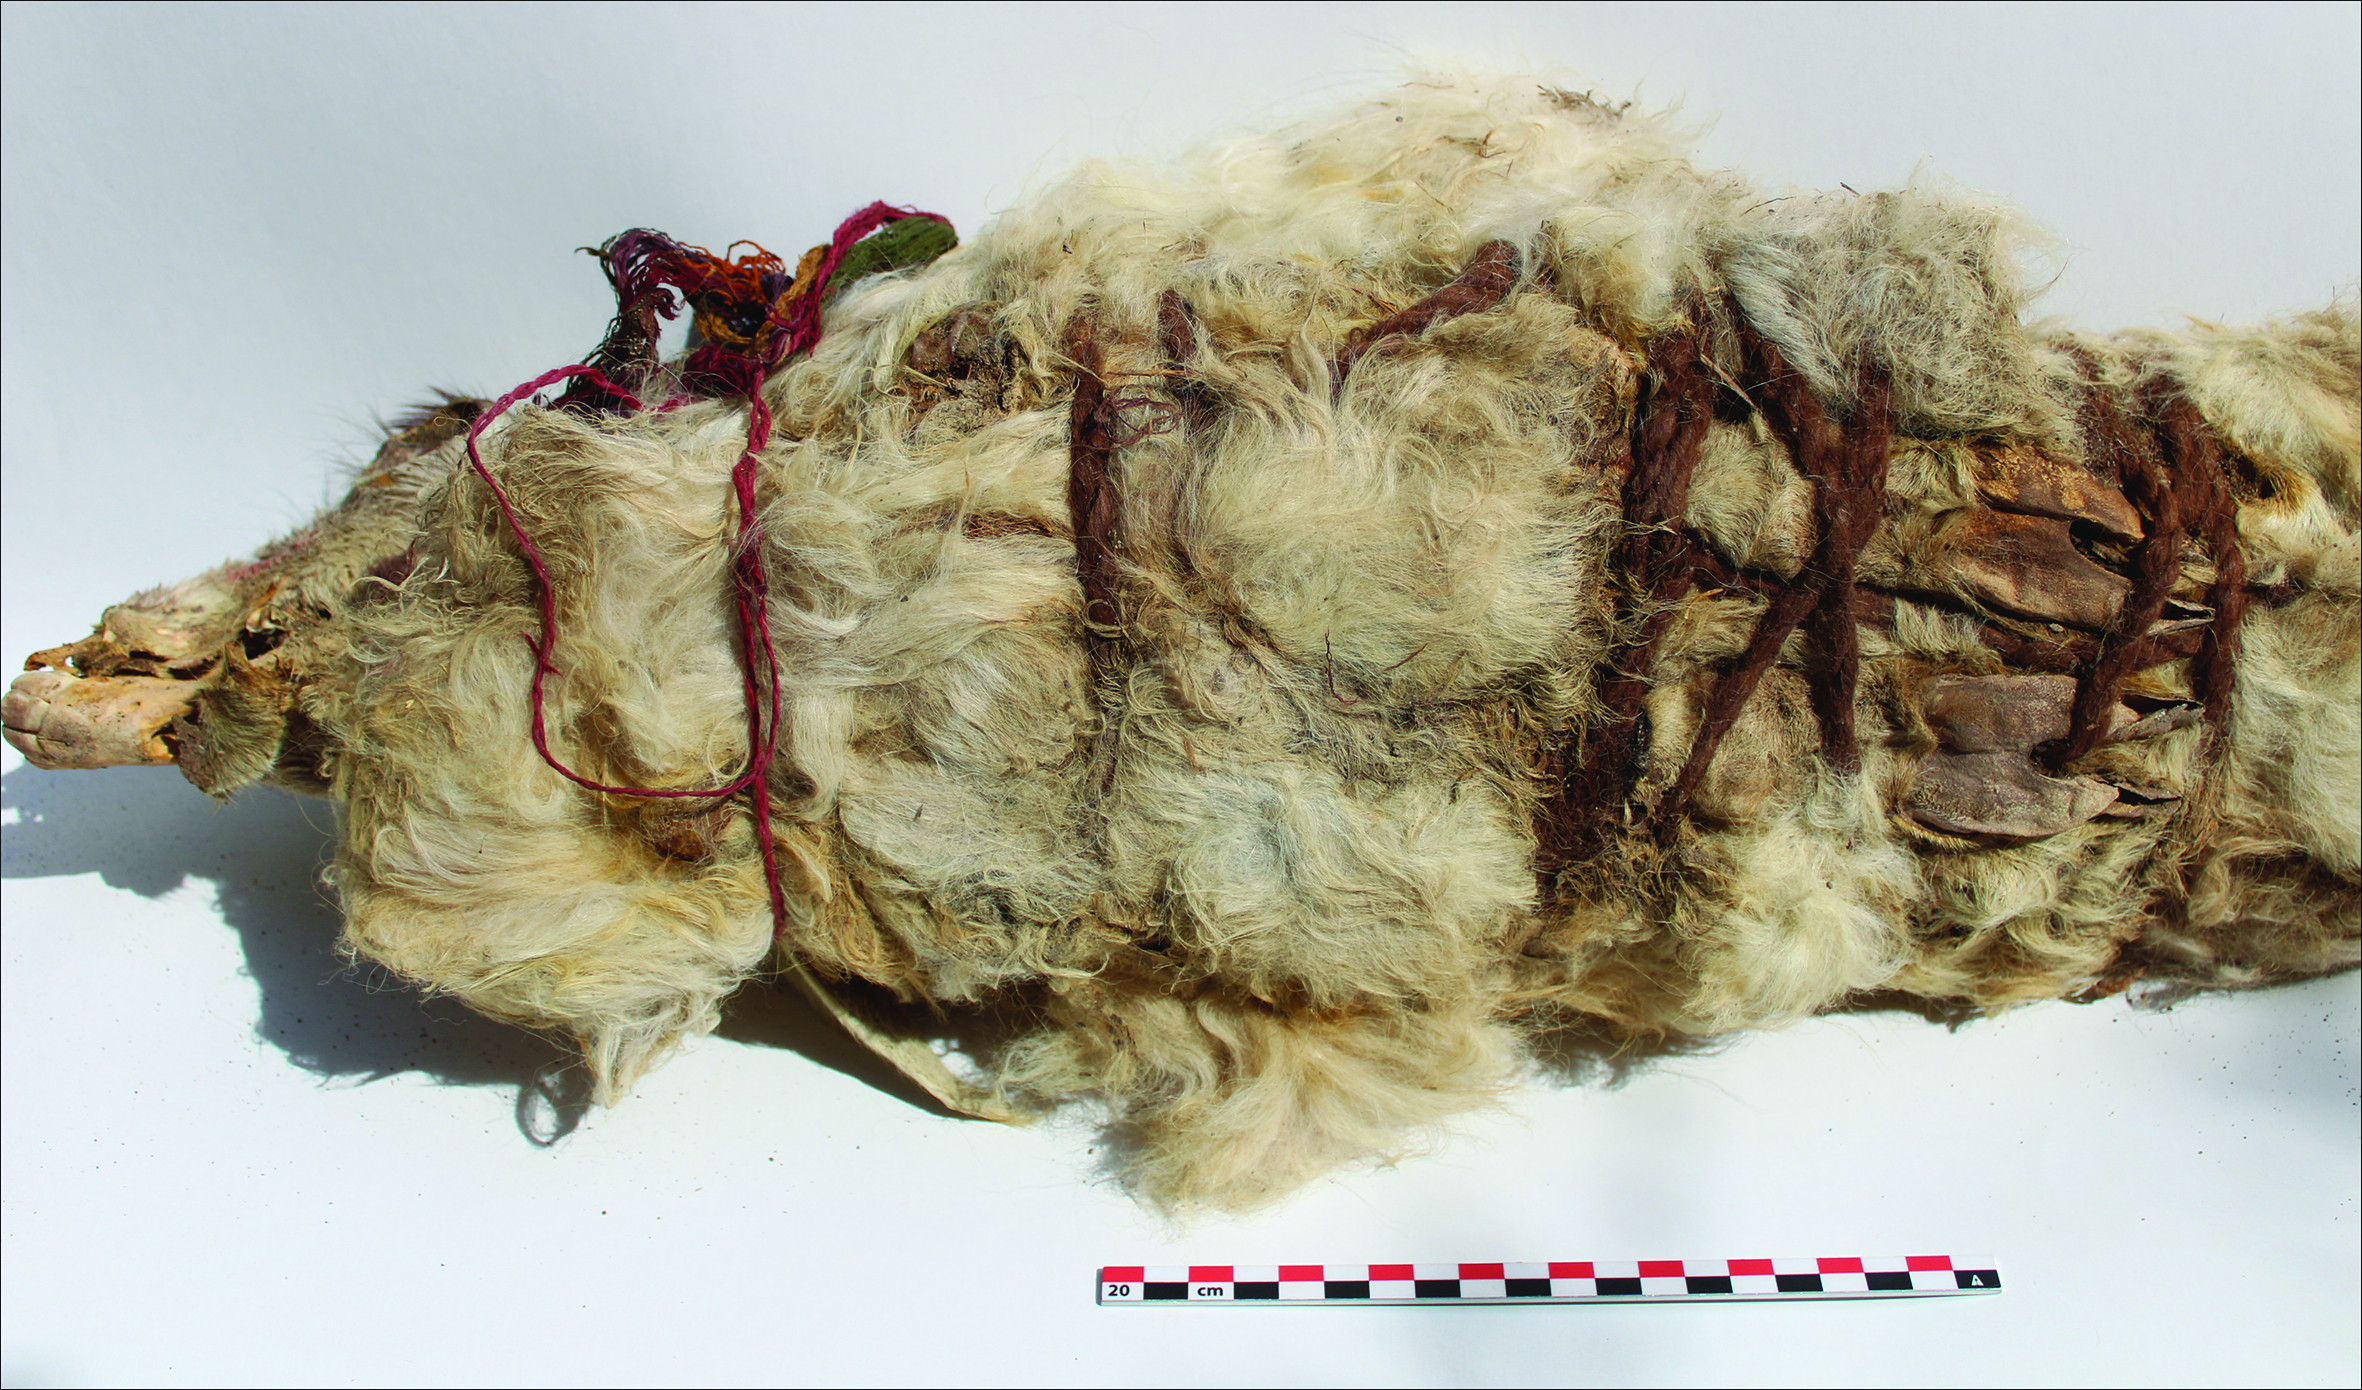 The remains of a white llama found at the site.  (Image: L. M. Valdez)